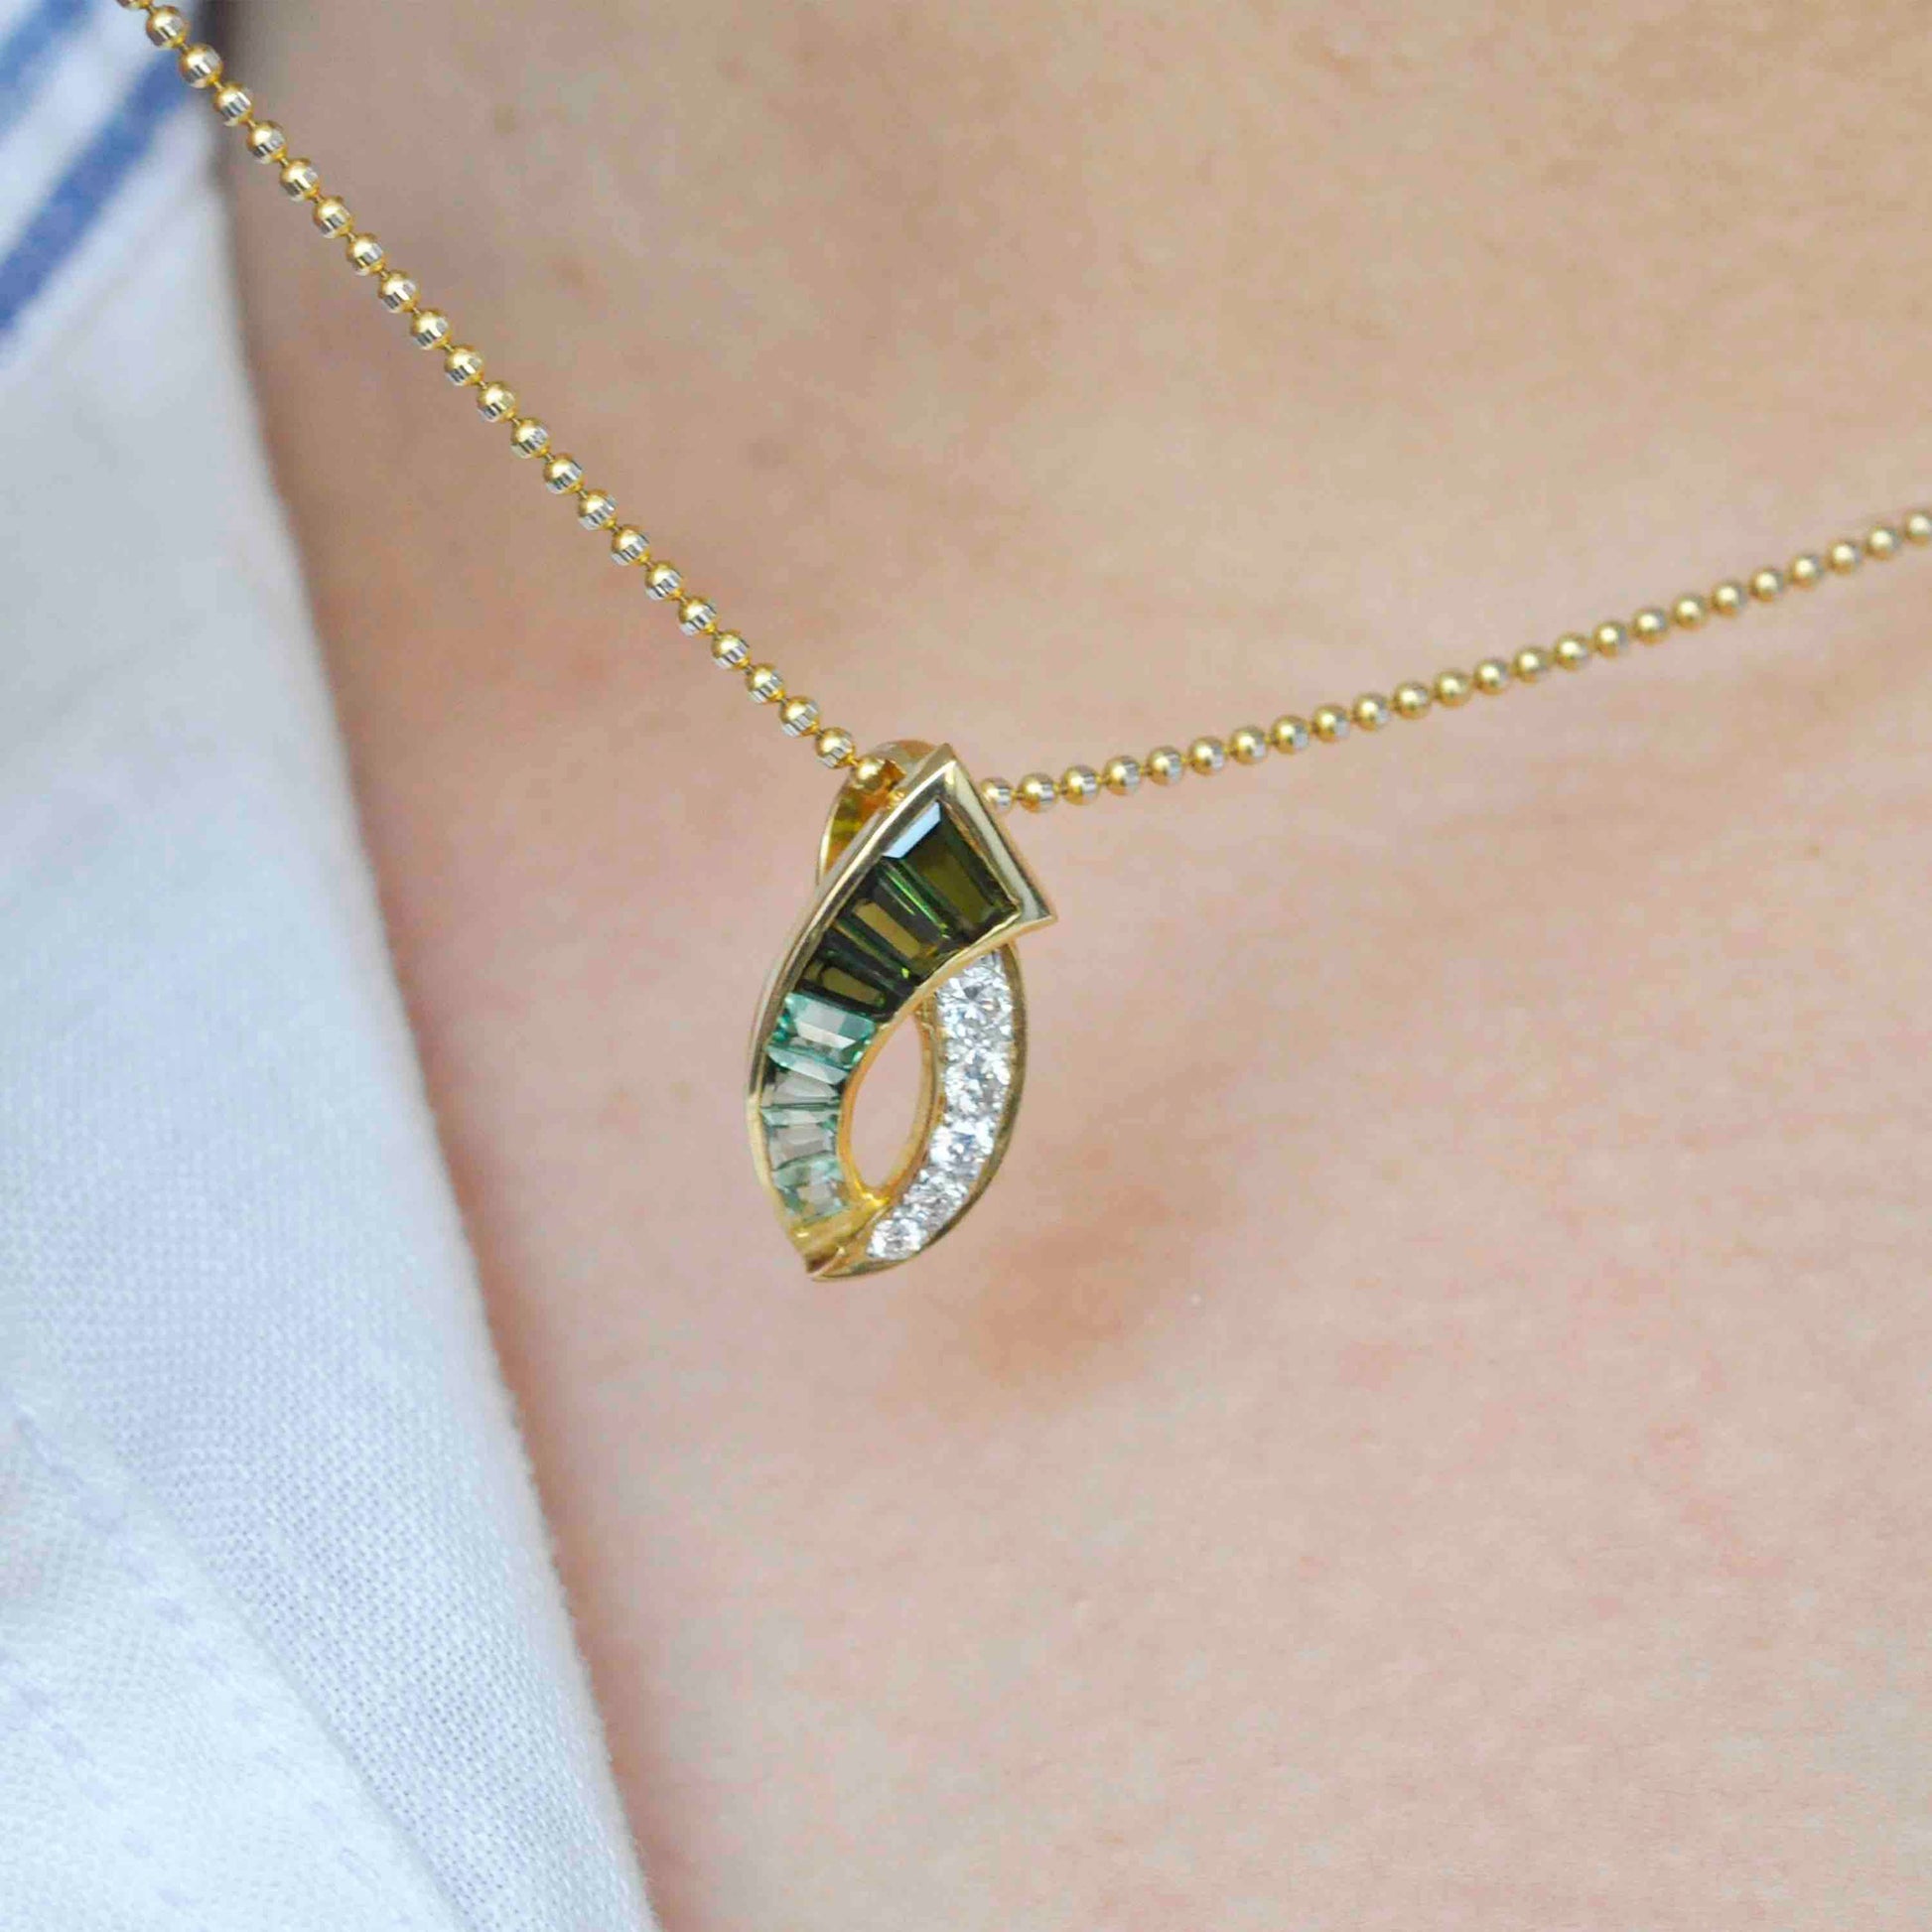 green tourmaline and diamond pendant with a curved design